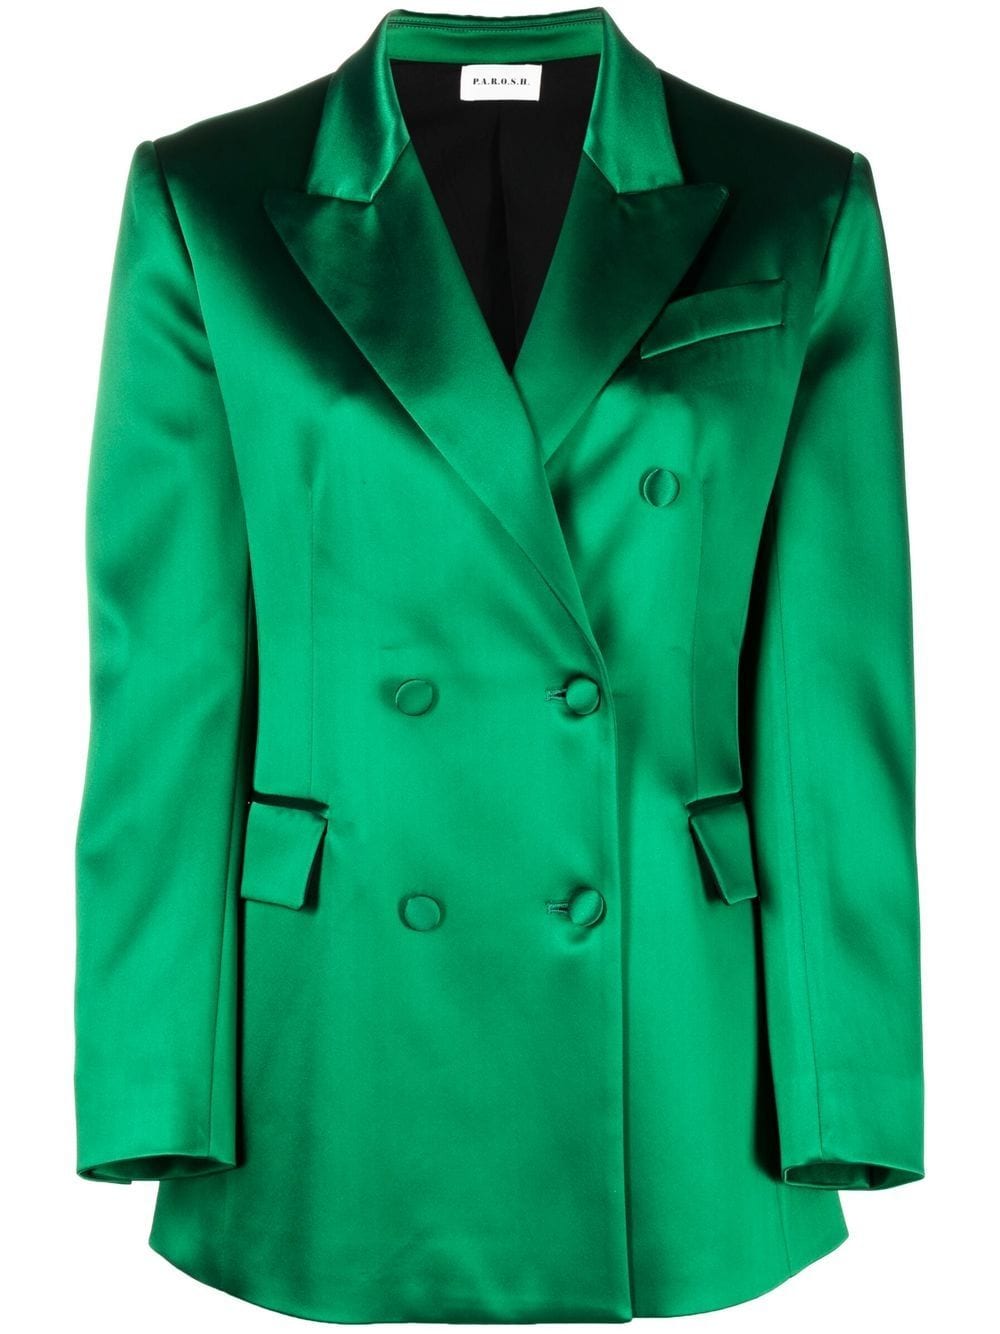 P.A.R.O.S.H. double-breasted tailored blazer - Green von P.A.R.O.S.H.